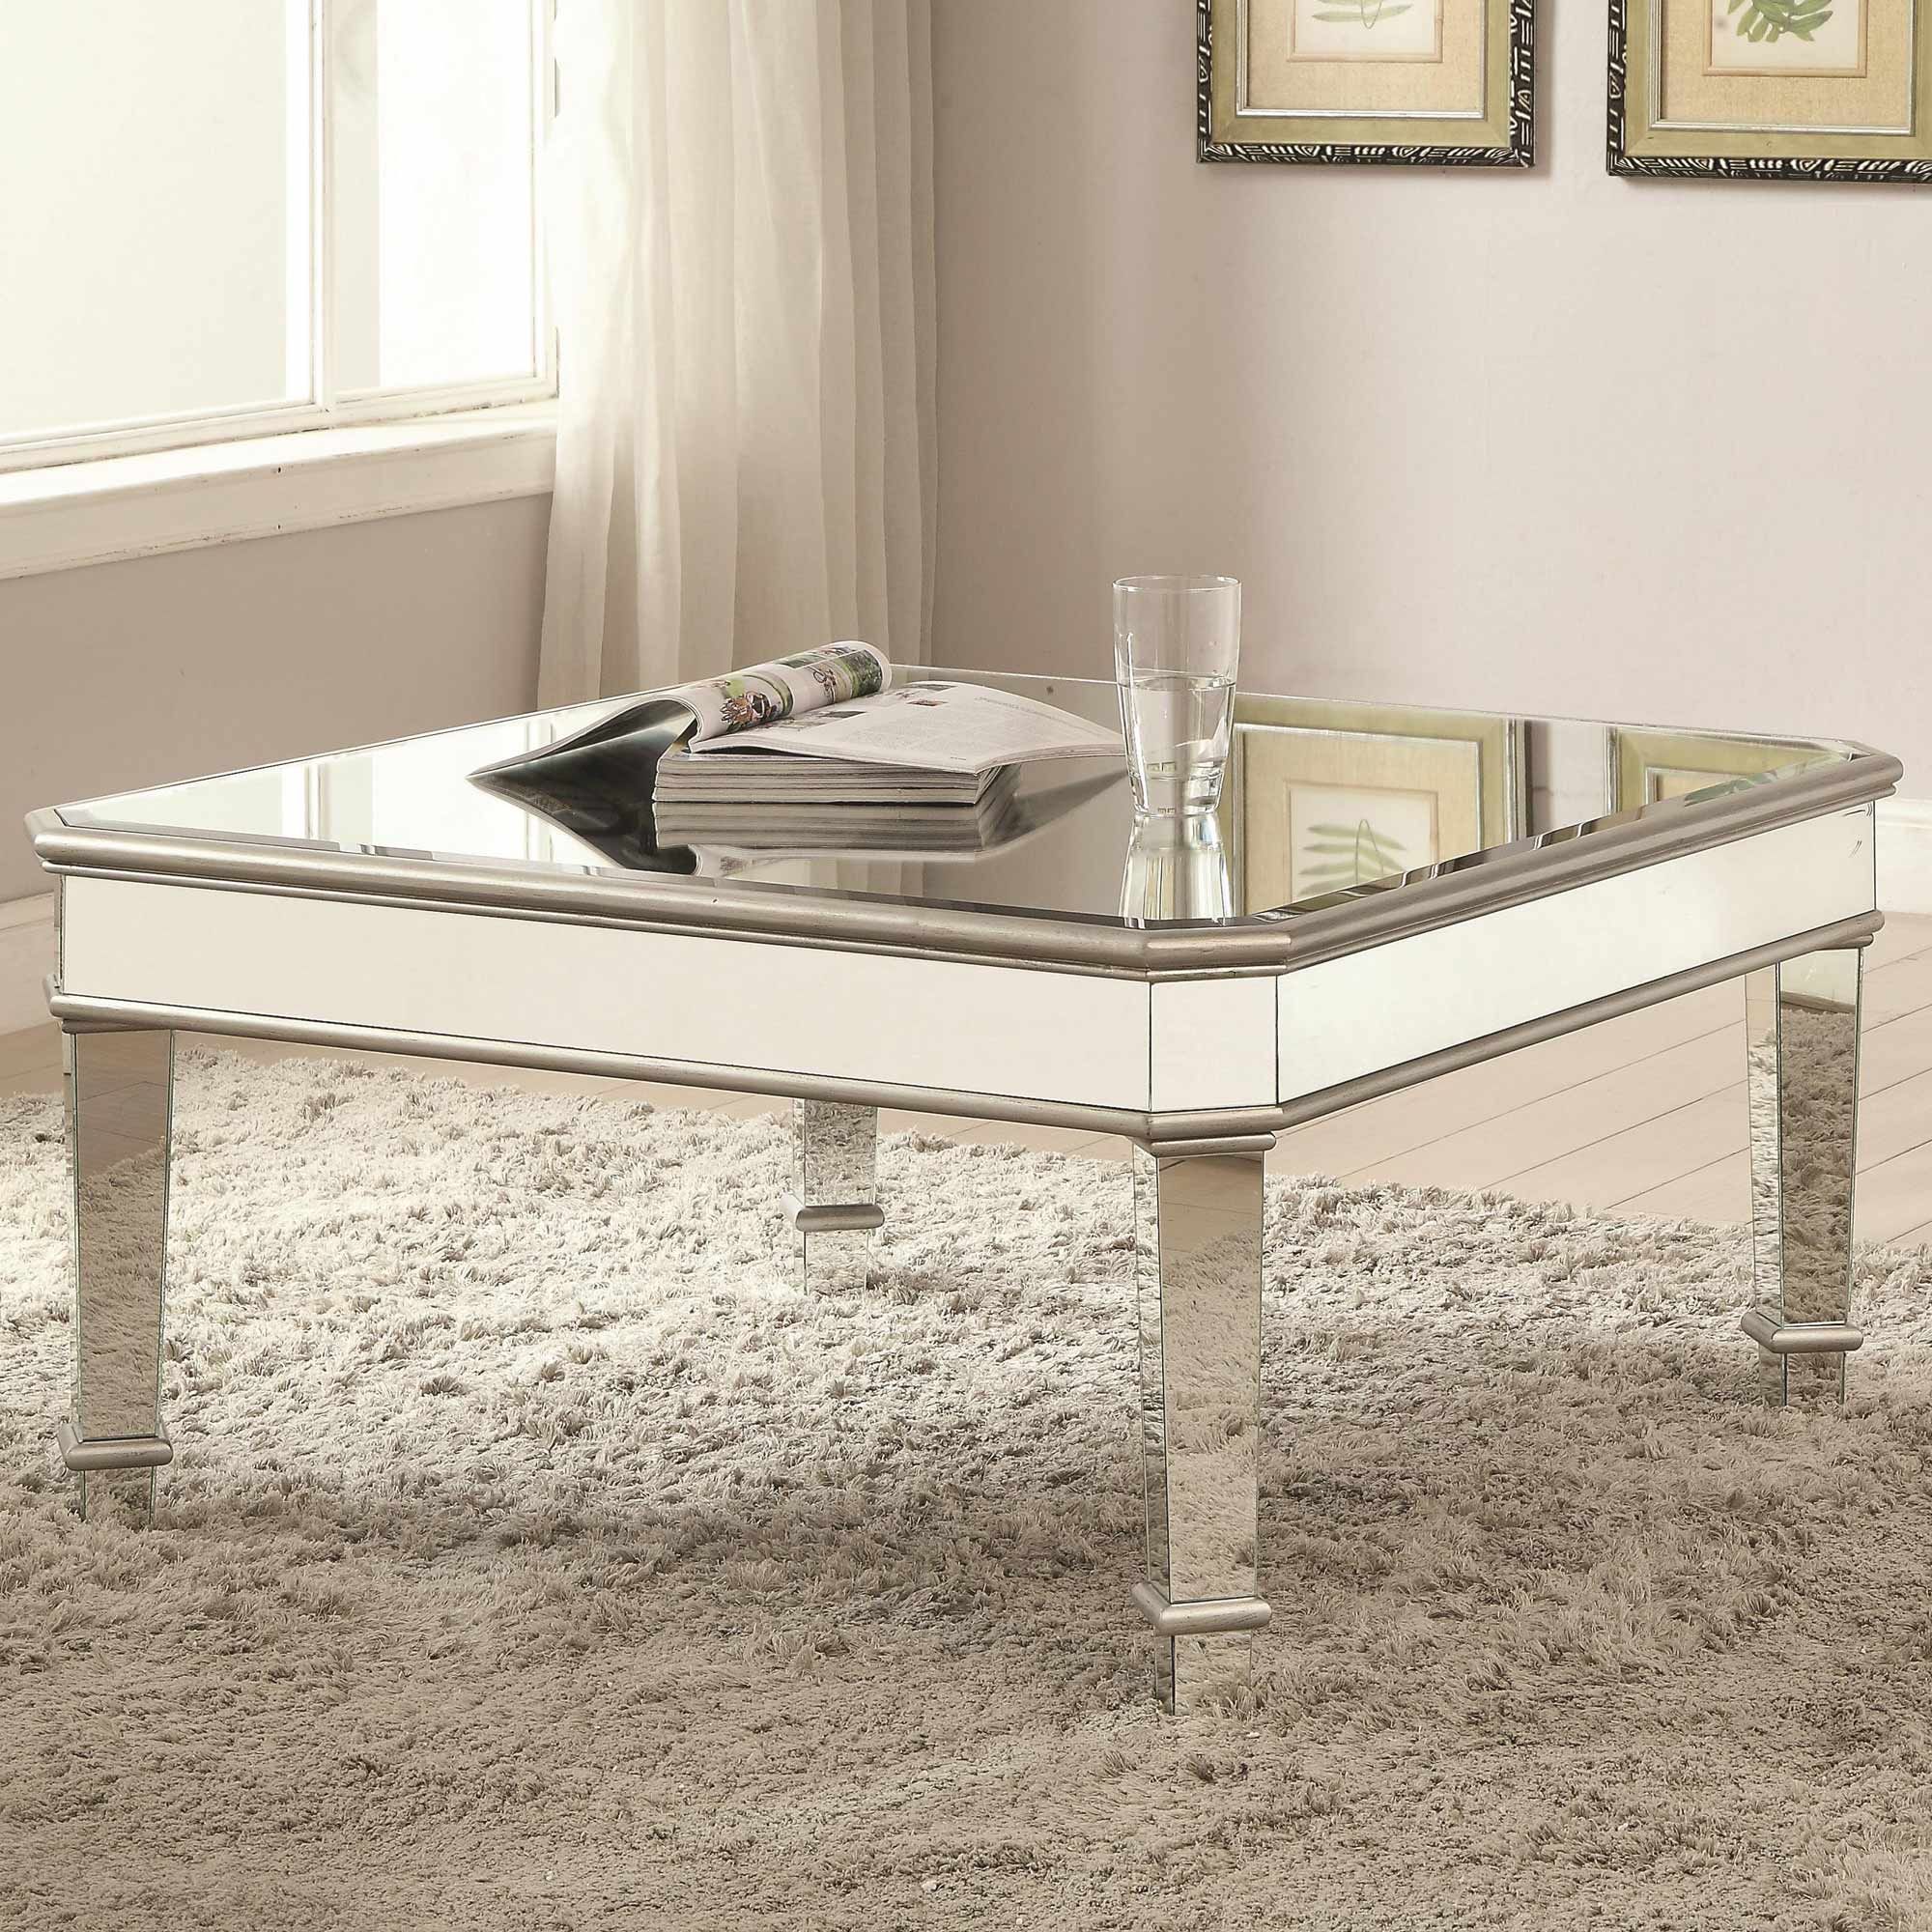 703937 Silver Coffee Table | Square Mirrored Coffee Table Intended For Silver Mirror And Chrome Coffee Tables (View 5 of 15)